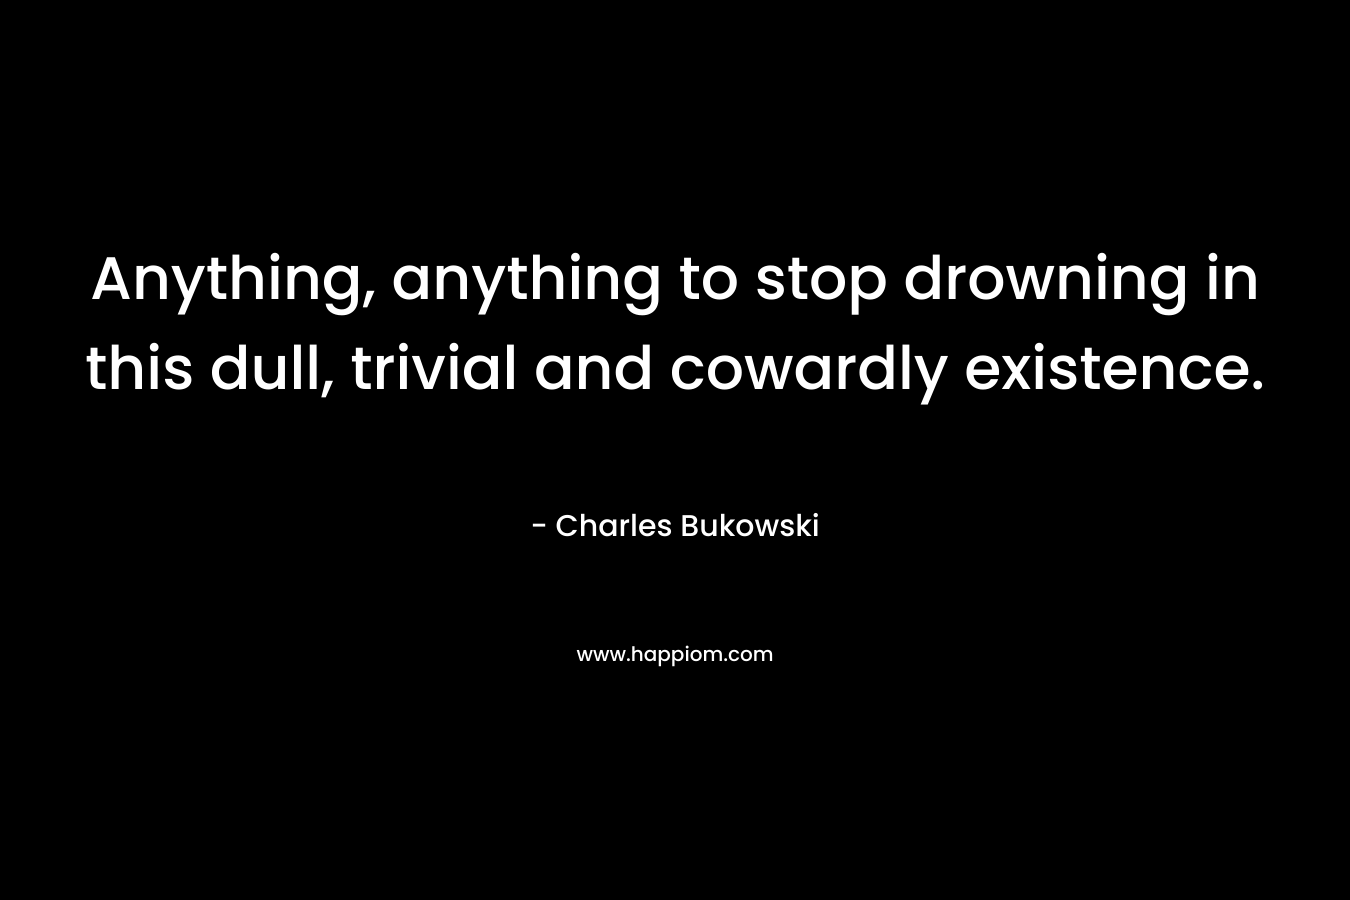 Anything, anything to stop drowning in this dull, trivial and cowardly existence. – Charles Bukowski